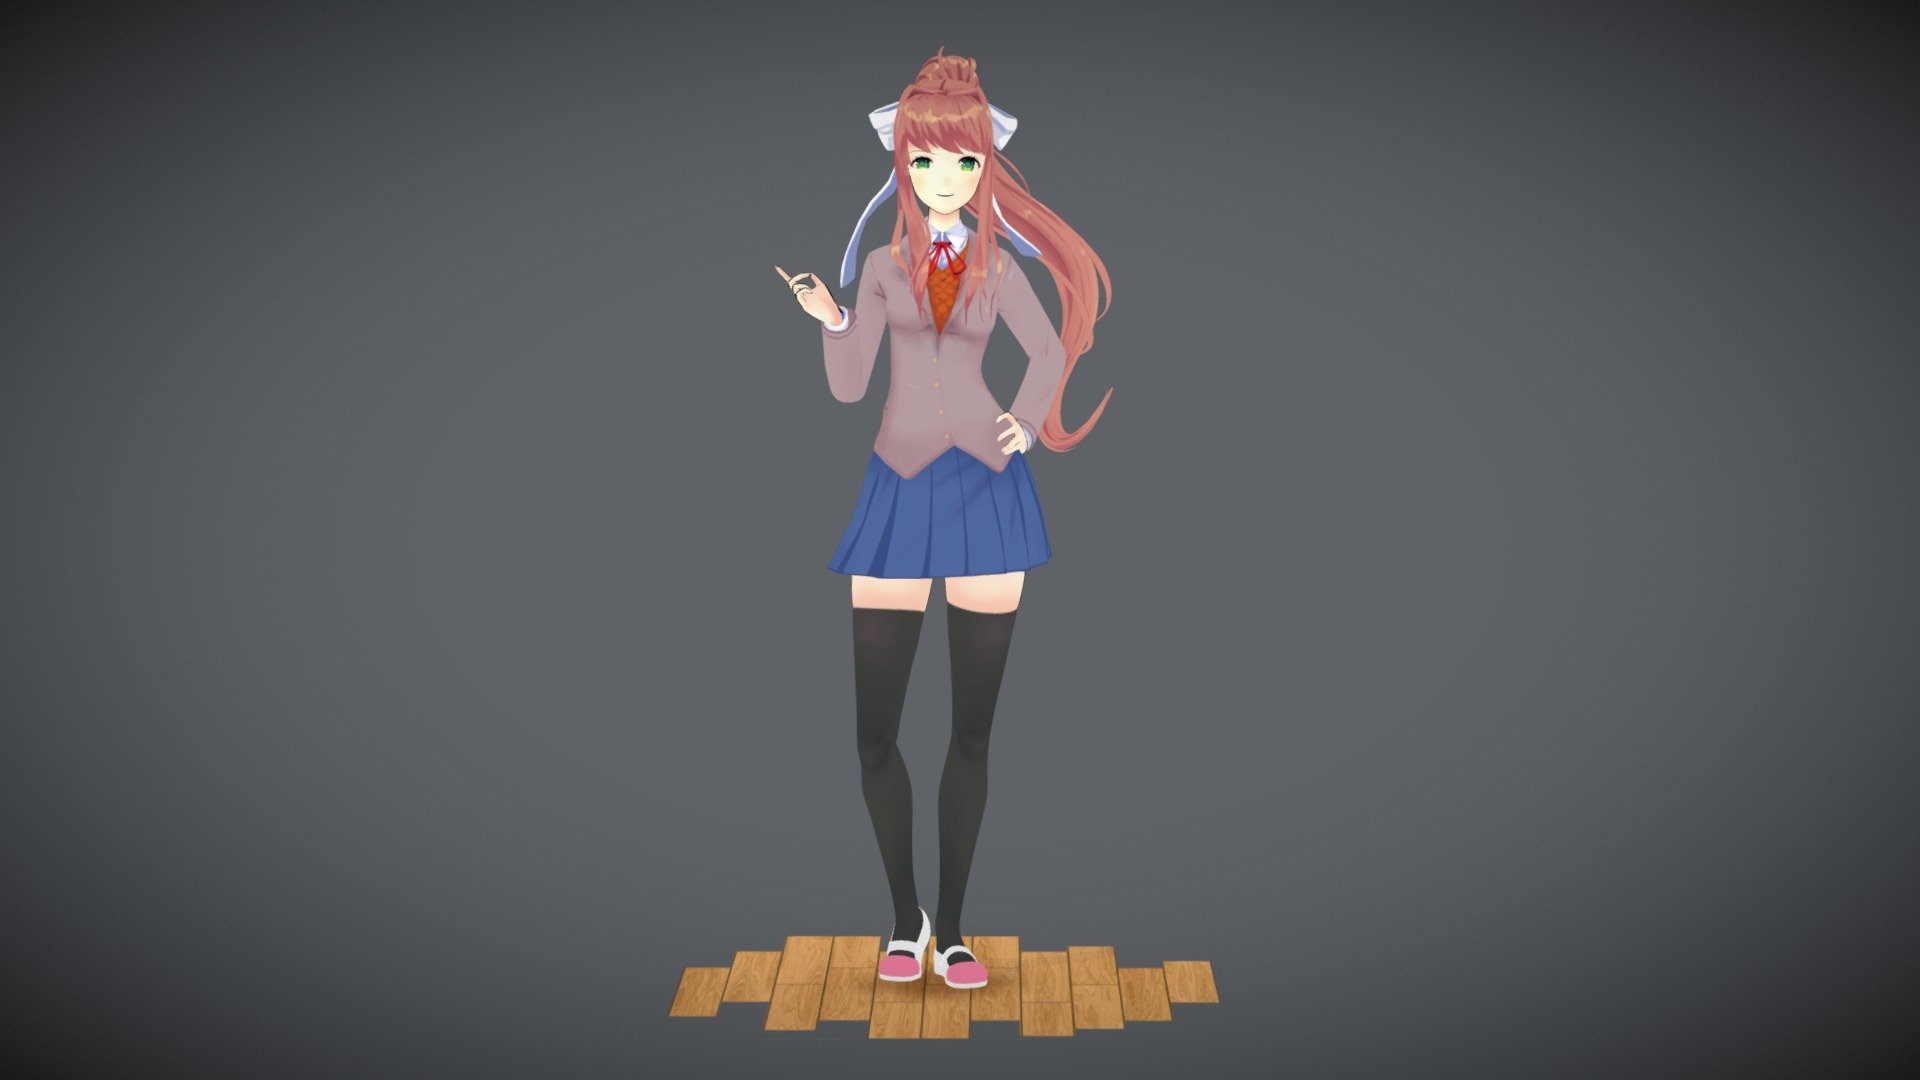 This is Monika from the game Doki-Doki Literature Club which was one of my favorite games from last year. The work Dan and Team Salvato did on the game was amazing and it's one of the most impactful games I've played in a long time. You can download the game for free here: http://ddlc.moe

This character was a huge challenge but also incredibly rewarding. I tried a lot of new stuff on it that I'd never tried before such as using blend shapes from ZBrush, using a hand painted texture style, and all of the modeling for her hair was completely different than anything else I had done before 3d model